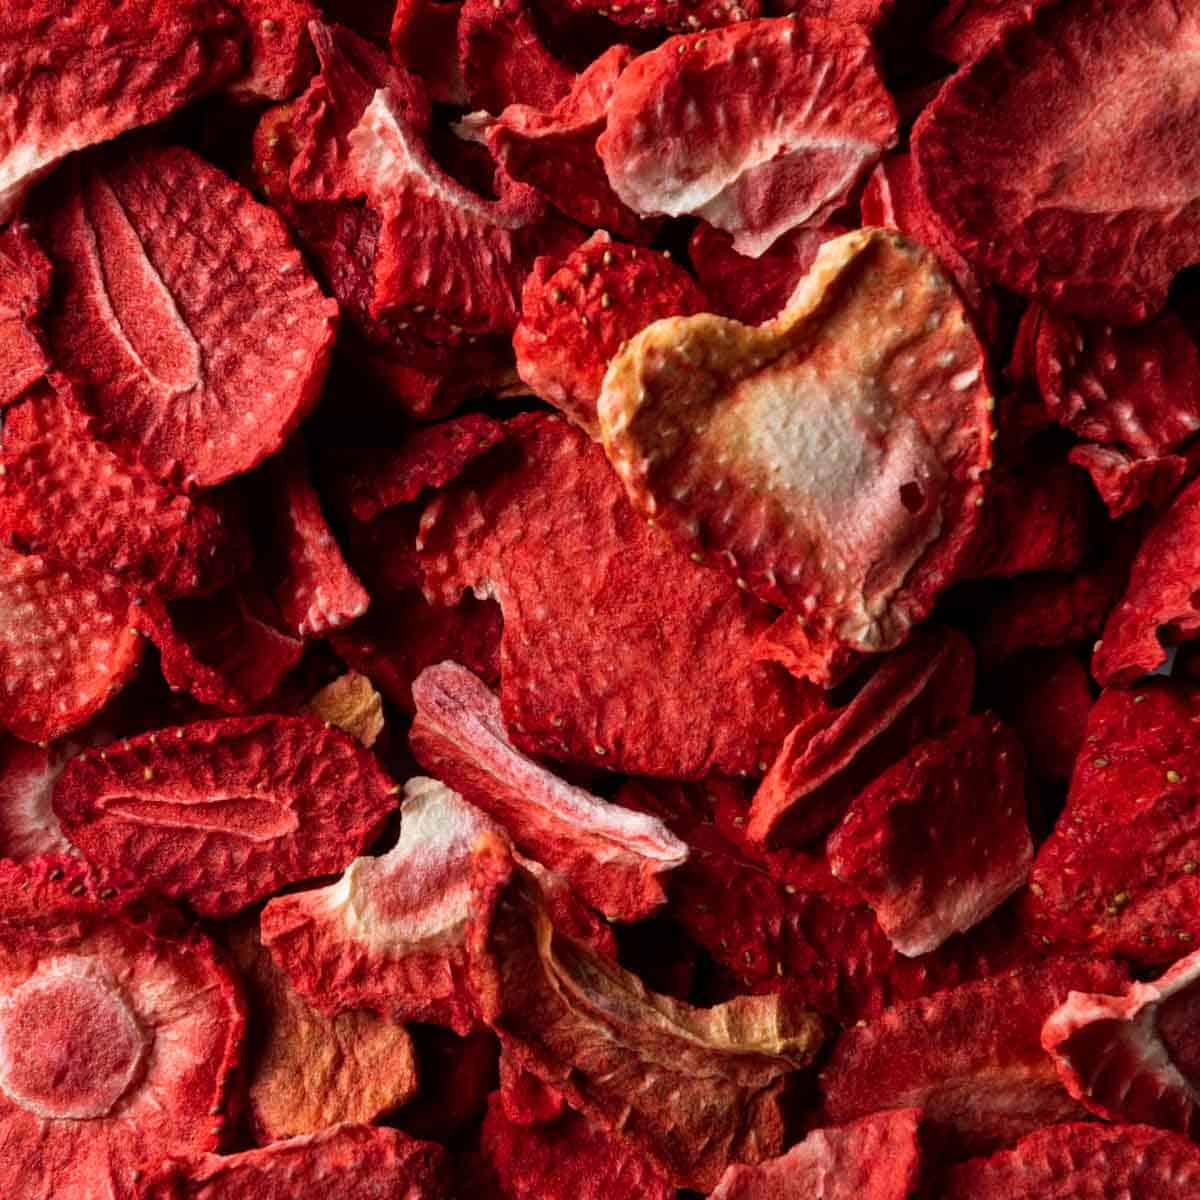 A close up shot of sliced freeze dried strawberries